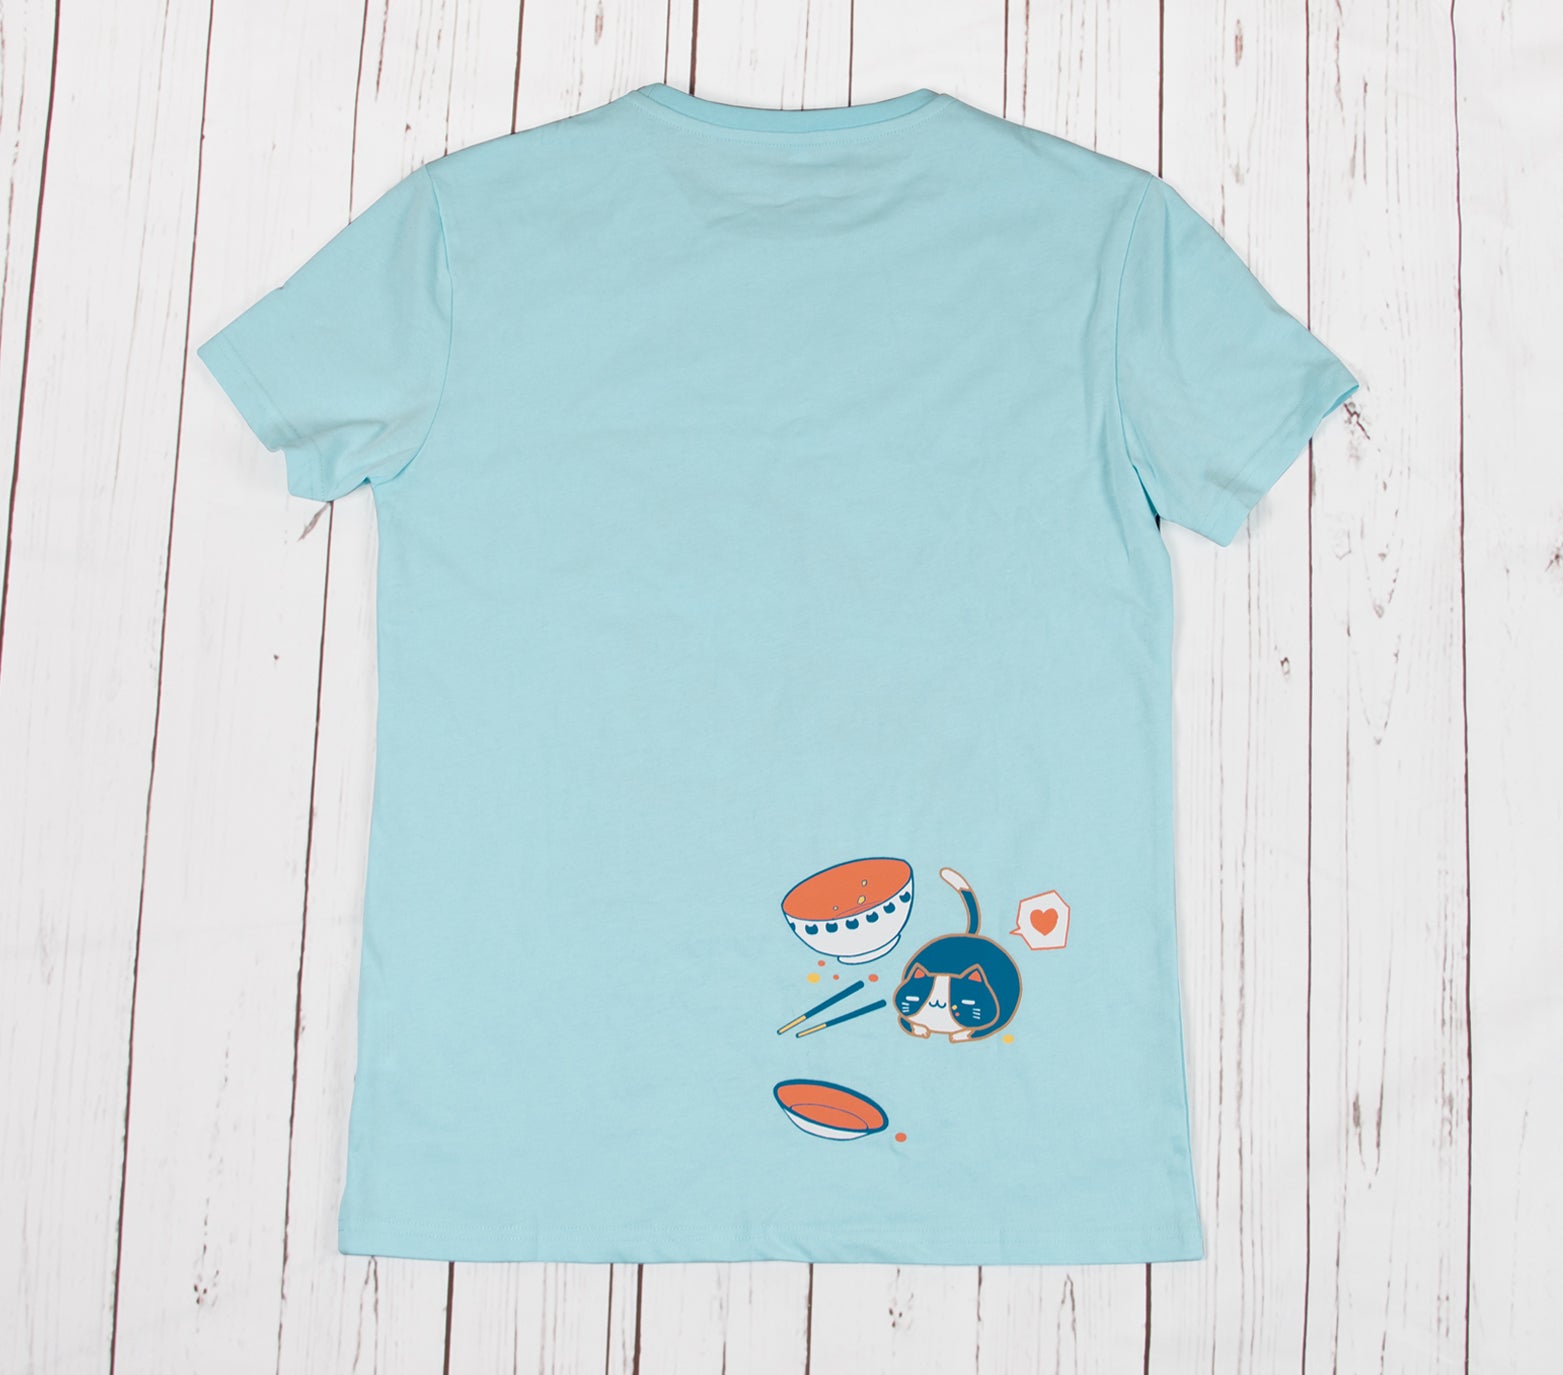 This is the back side of a mint color t-shirt that features a finished bowl of ramen and a resting cat that have just finished the bowl, showing a satisfied face. The shirt is made of 100% stretchy cotton and is available from XXS to 2XL.